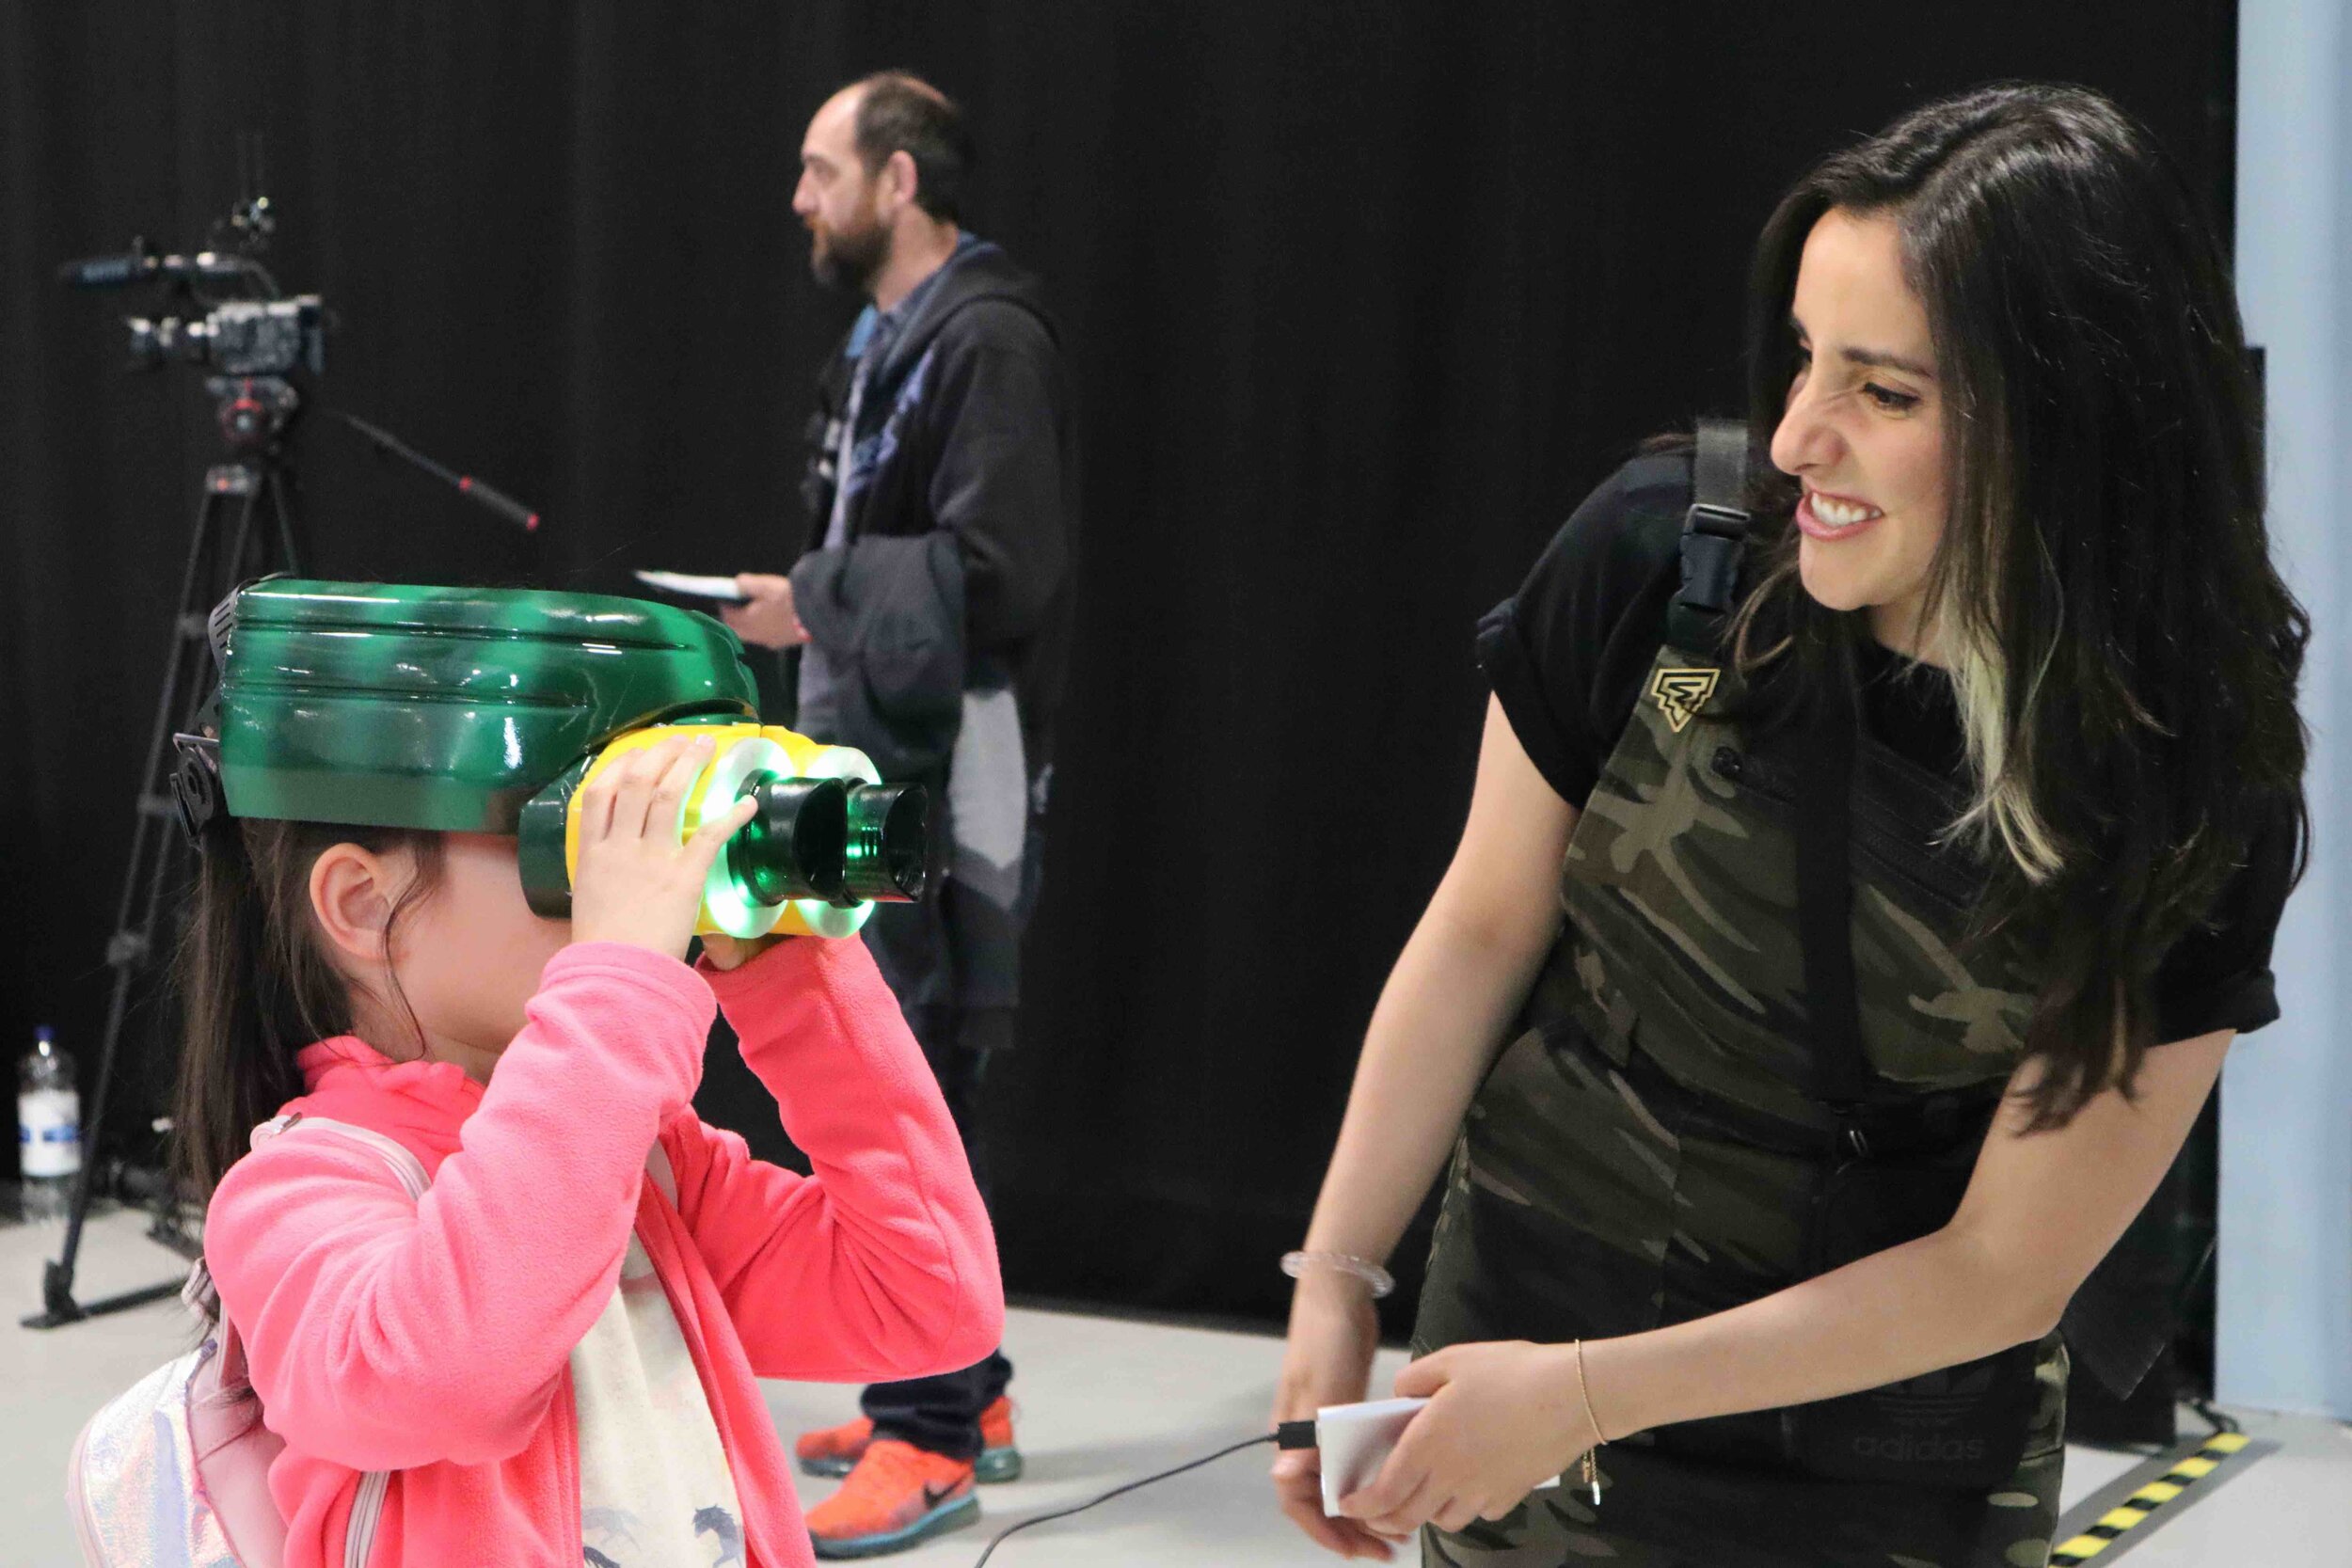 Estefannie meeting young makers at Coolest Projects - Dublin, Ireland May 2019